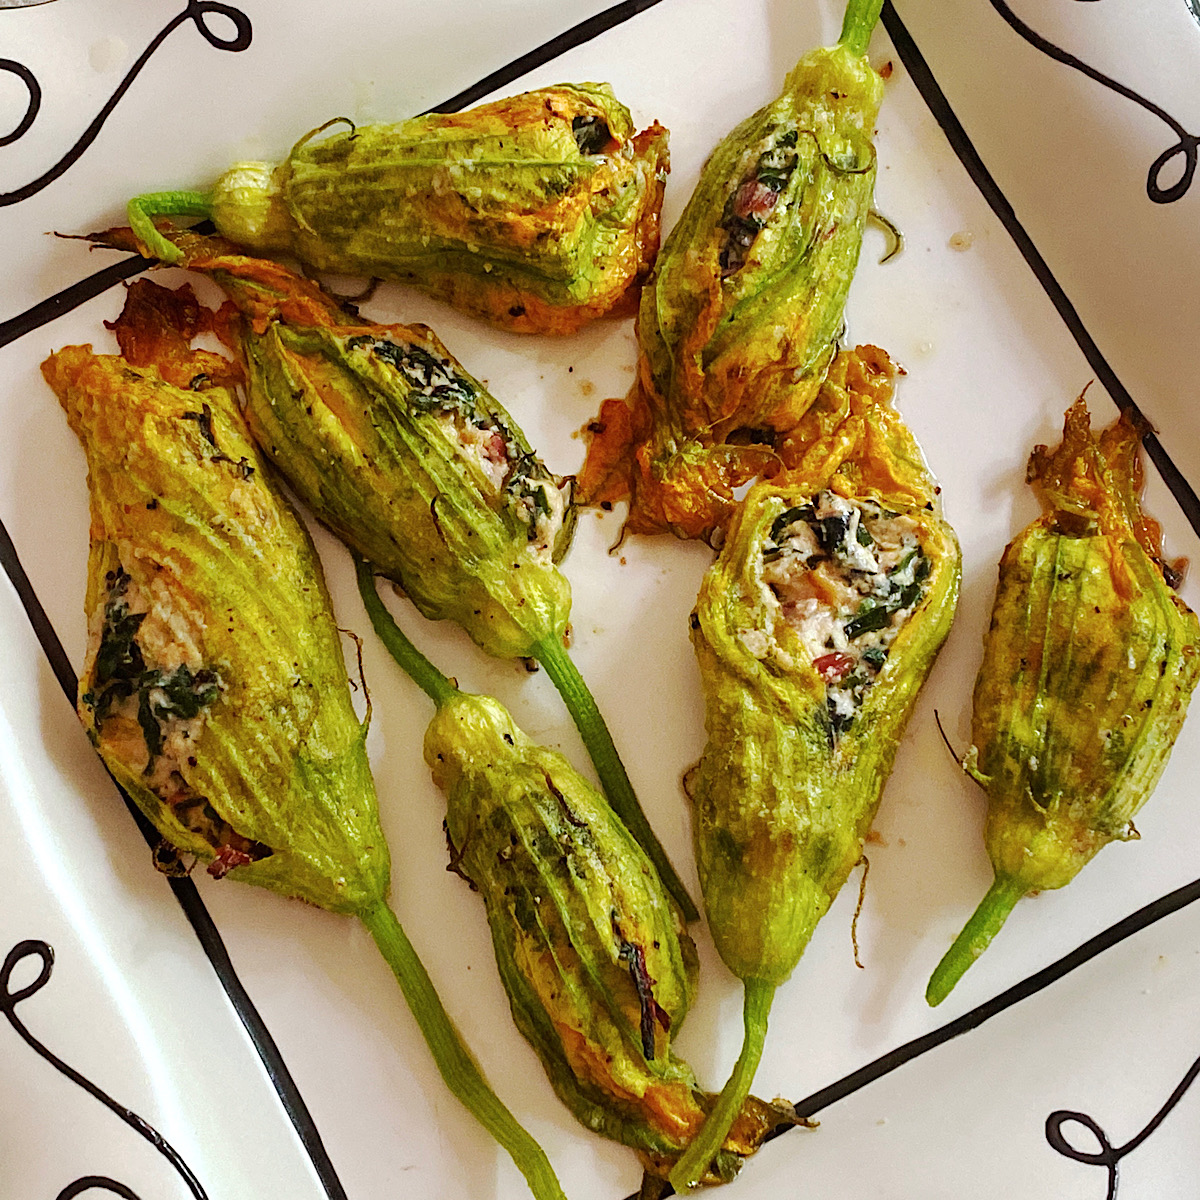 Roasted Stuffed Squash Blossoms: A Complete Guide to Ingredients, Preparation, and Pairing